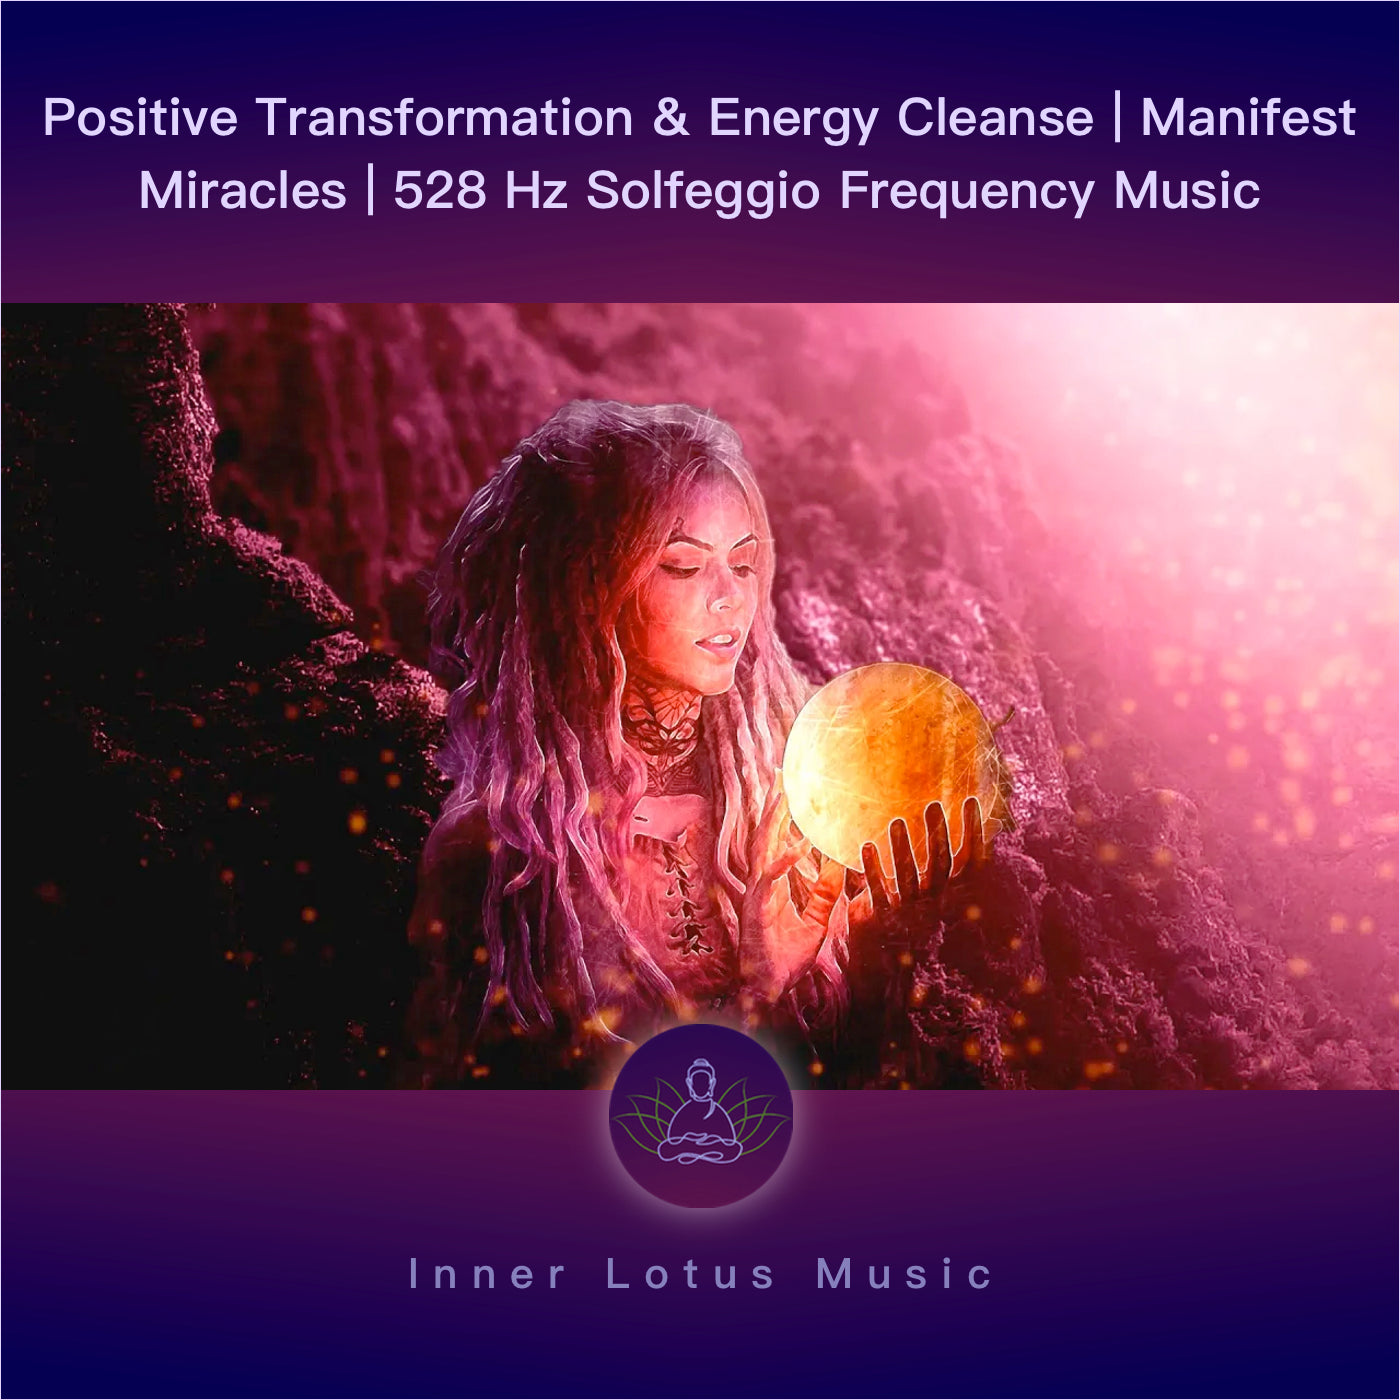 Positive Transformation & Energy Cleanse | Manifest Miracles | 528 Hz Solfeggio Frequency Music